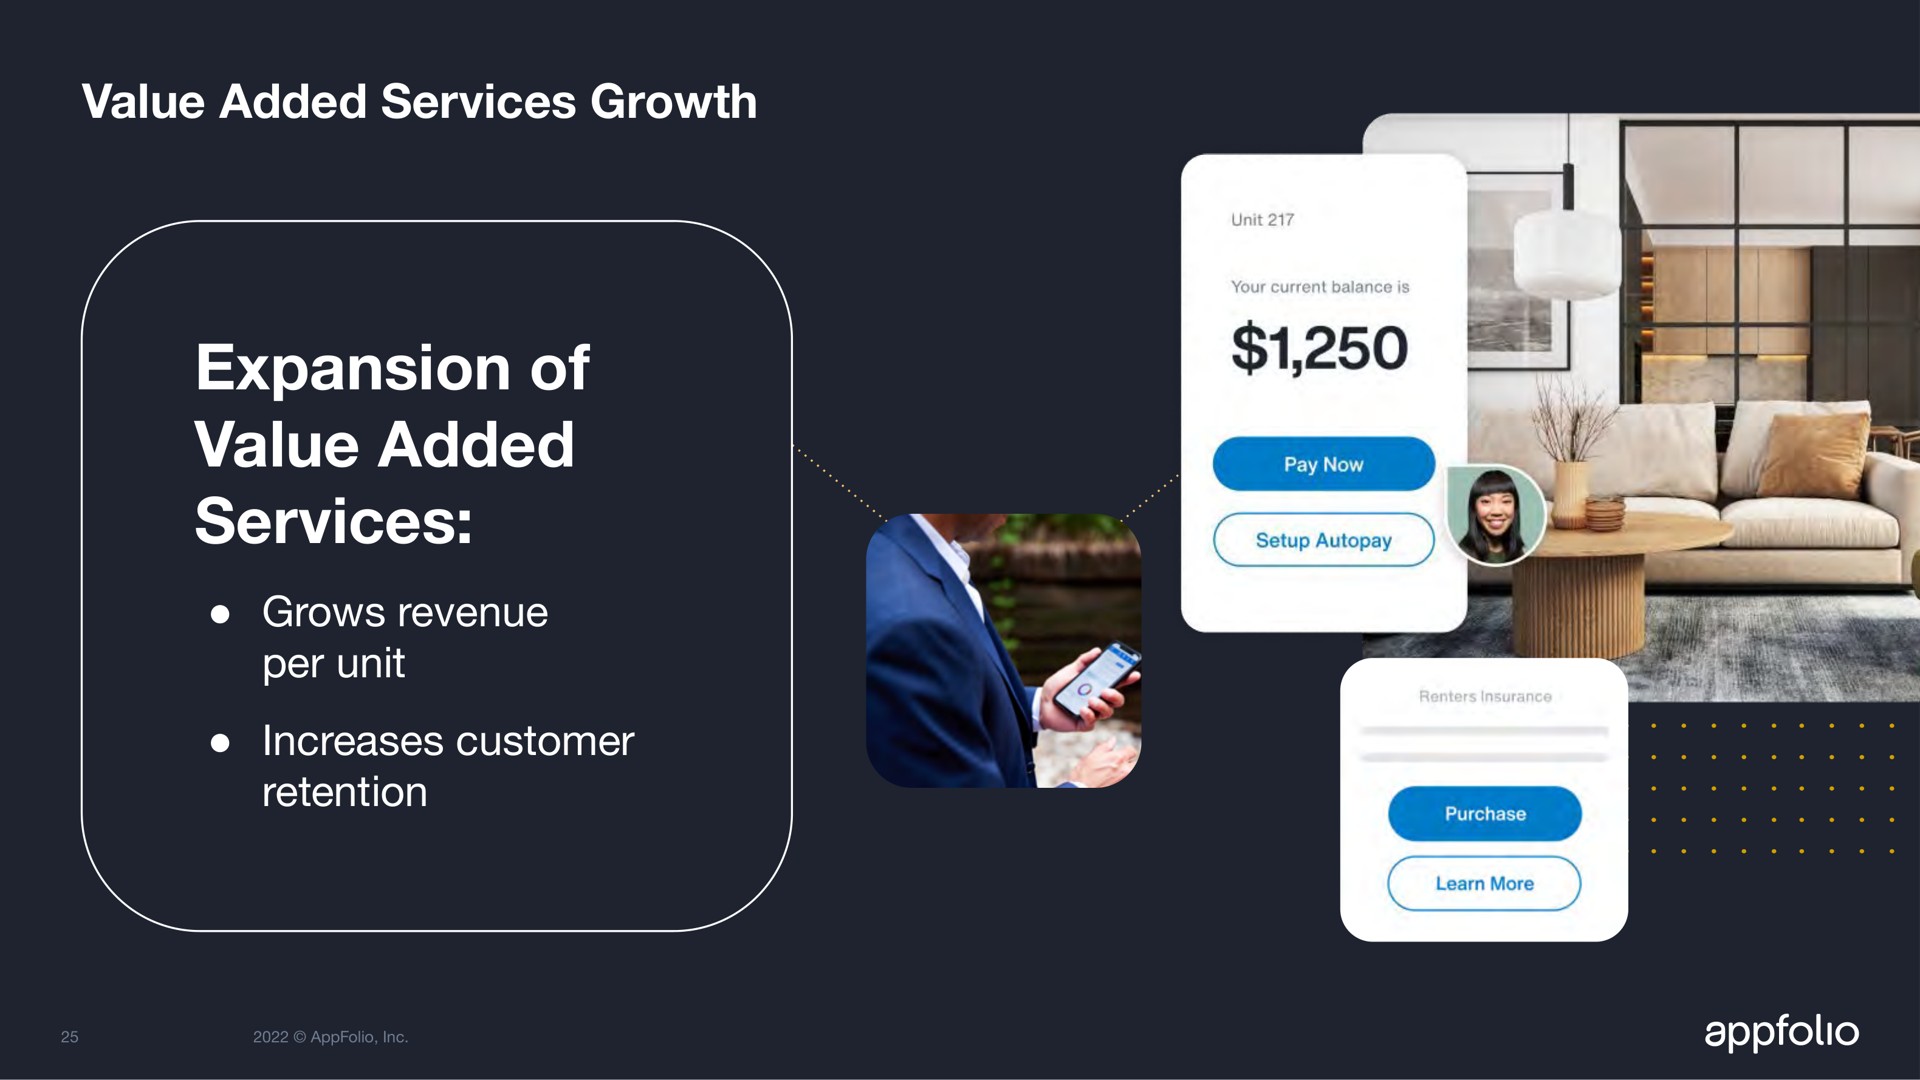 value added services growth expansion of value added services | AppFolio